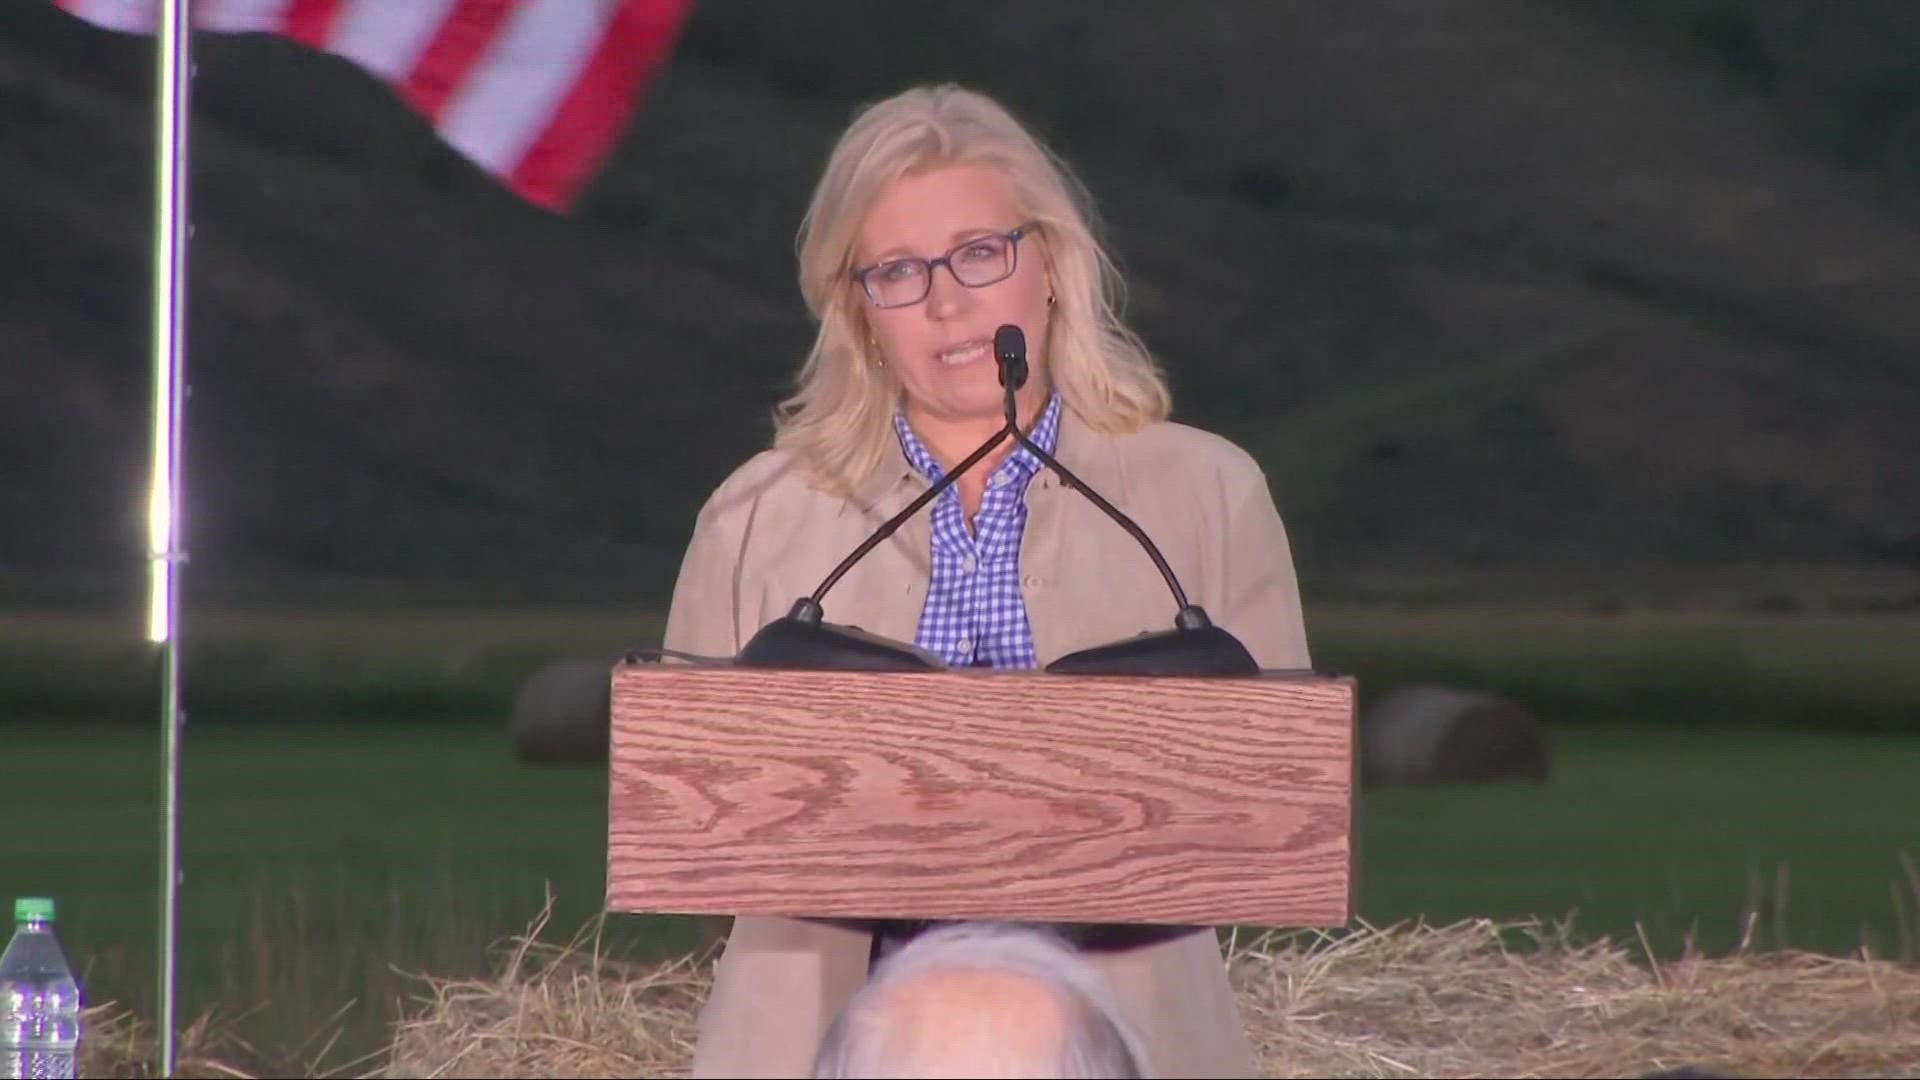 Wyoming Rep. Liz Cheney, Donald Trump’s fiercest Republican adversary in Congress, was defeated in a GOP primary Tuesday.